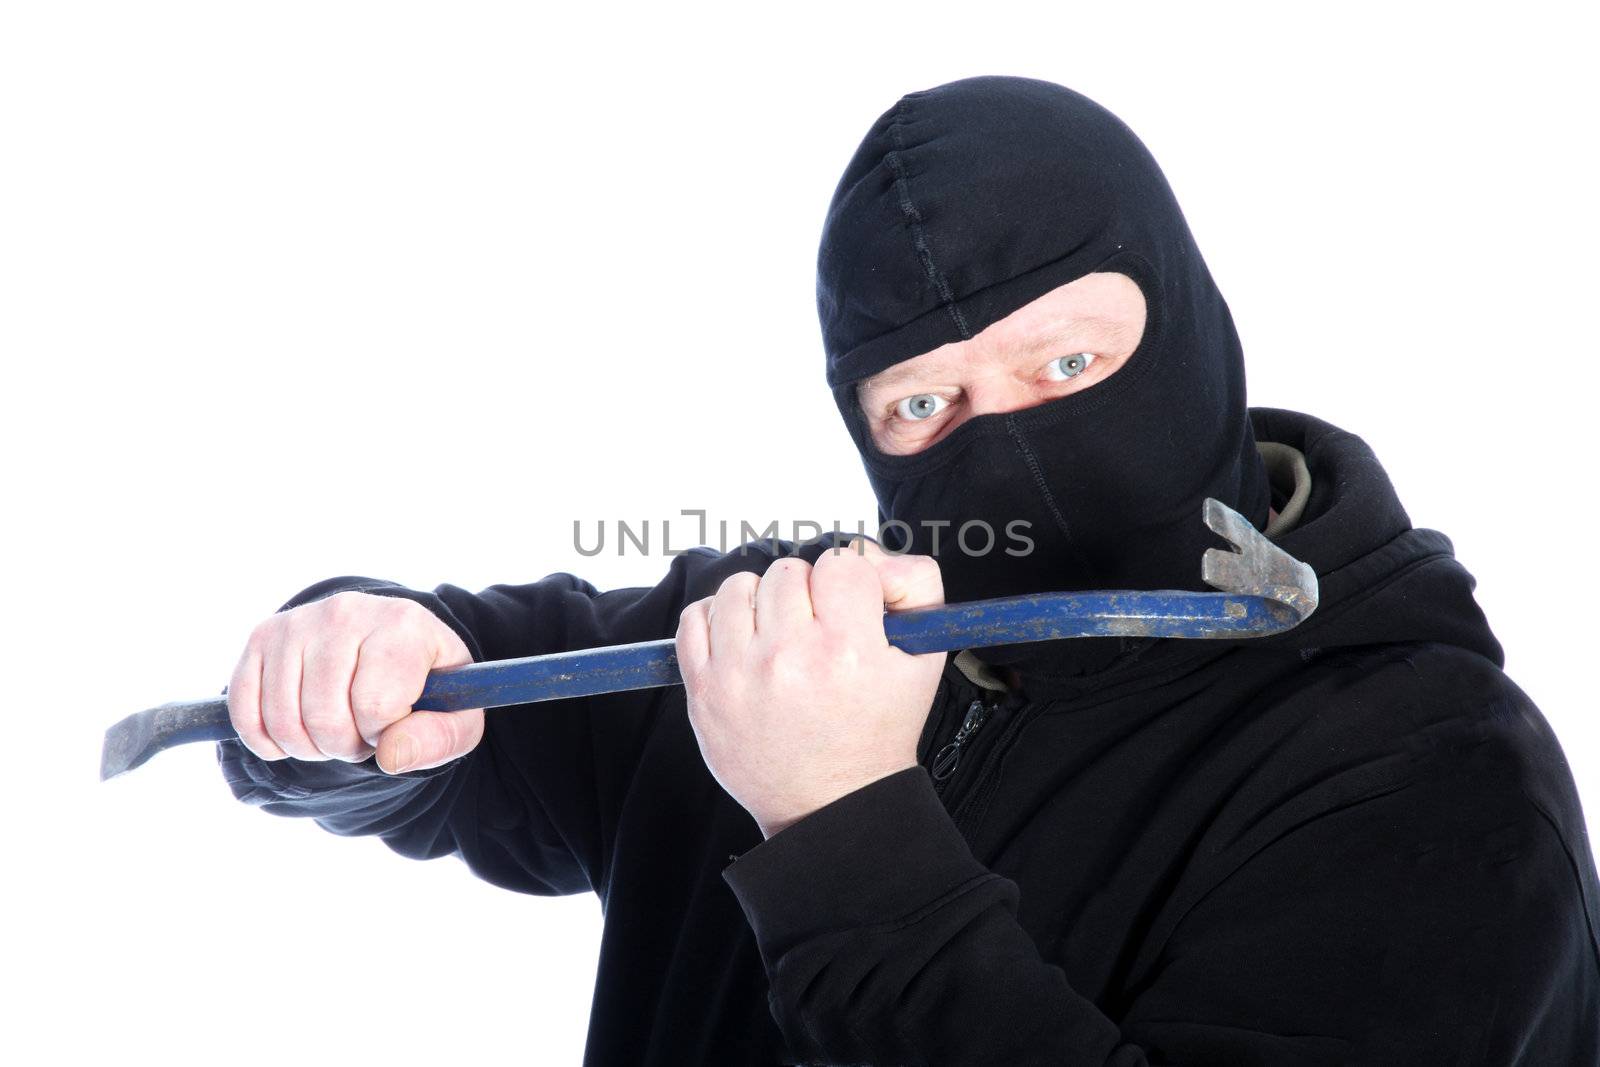 Masked robber wielding a crowbar by Farina6000